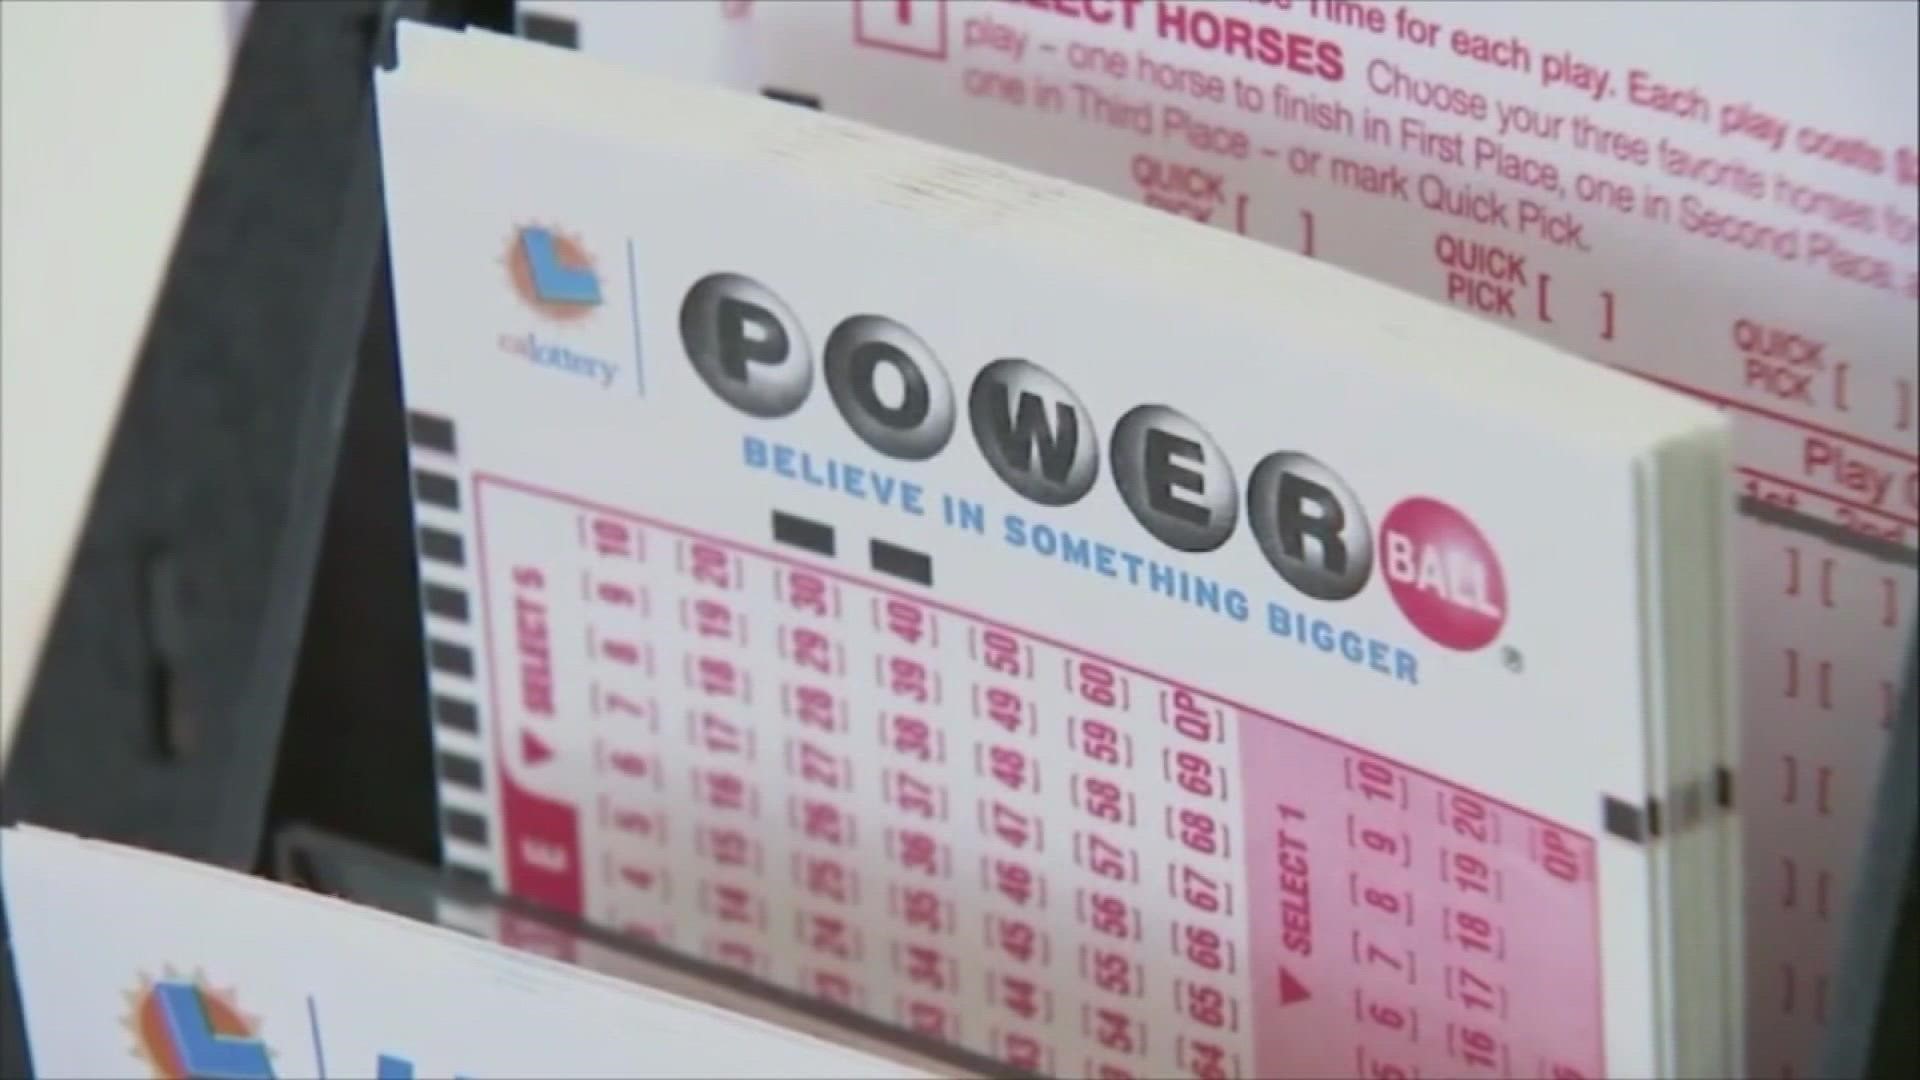 Mary Harville, president and CEO of the Kentucky Lottery, said state and federal taxes would equal about 29 percent of the prize, with 4 percent going to the state.